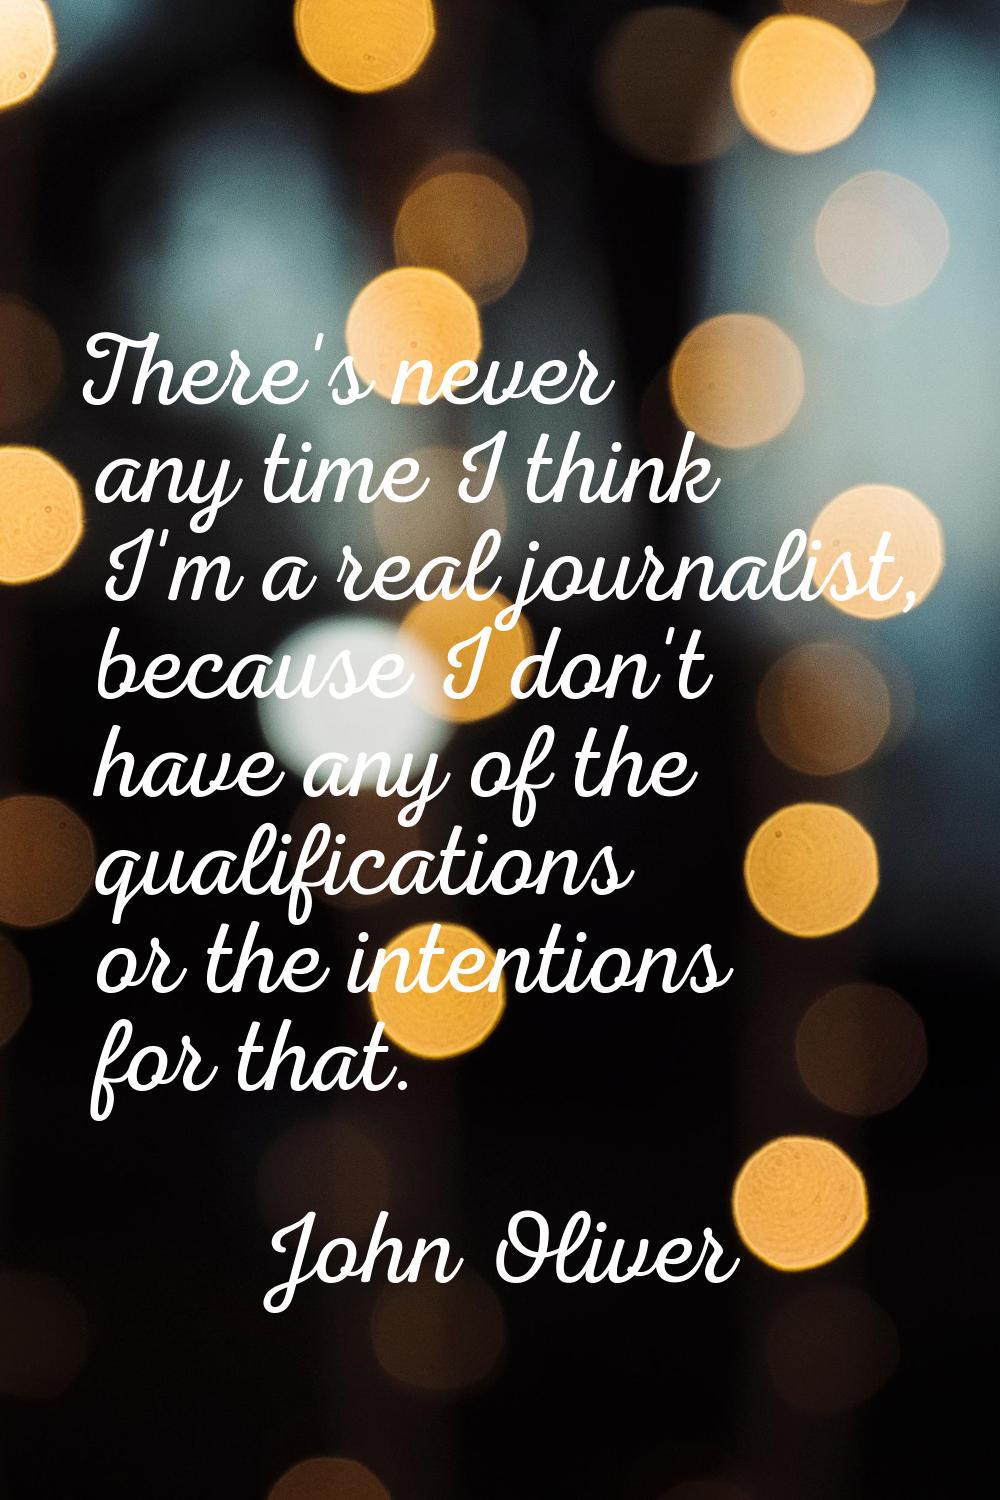 There's never any time I think I'm a real journalist, because I don't have any of the qualification